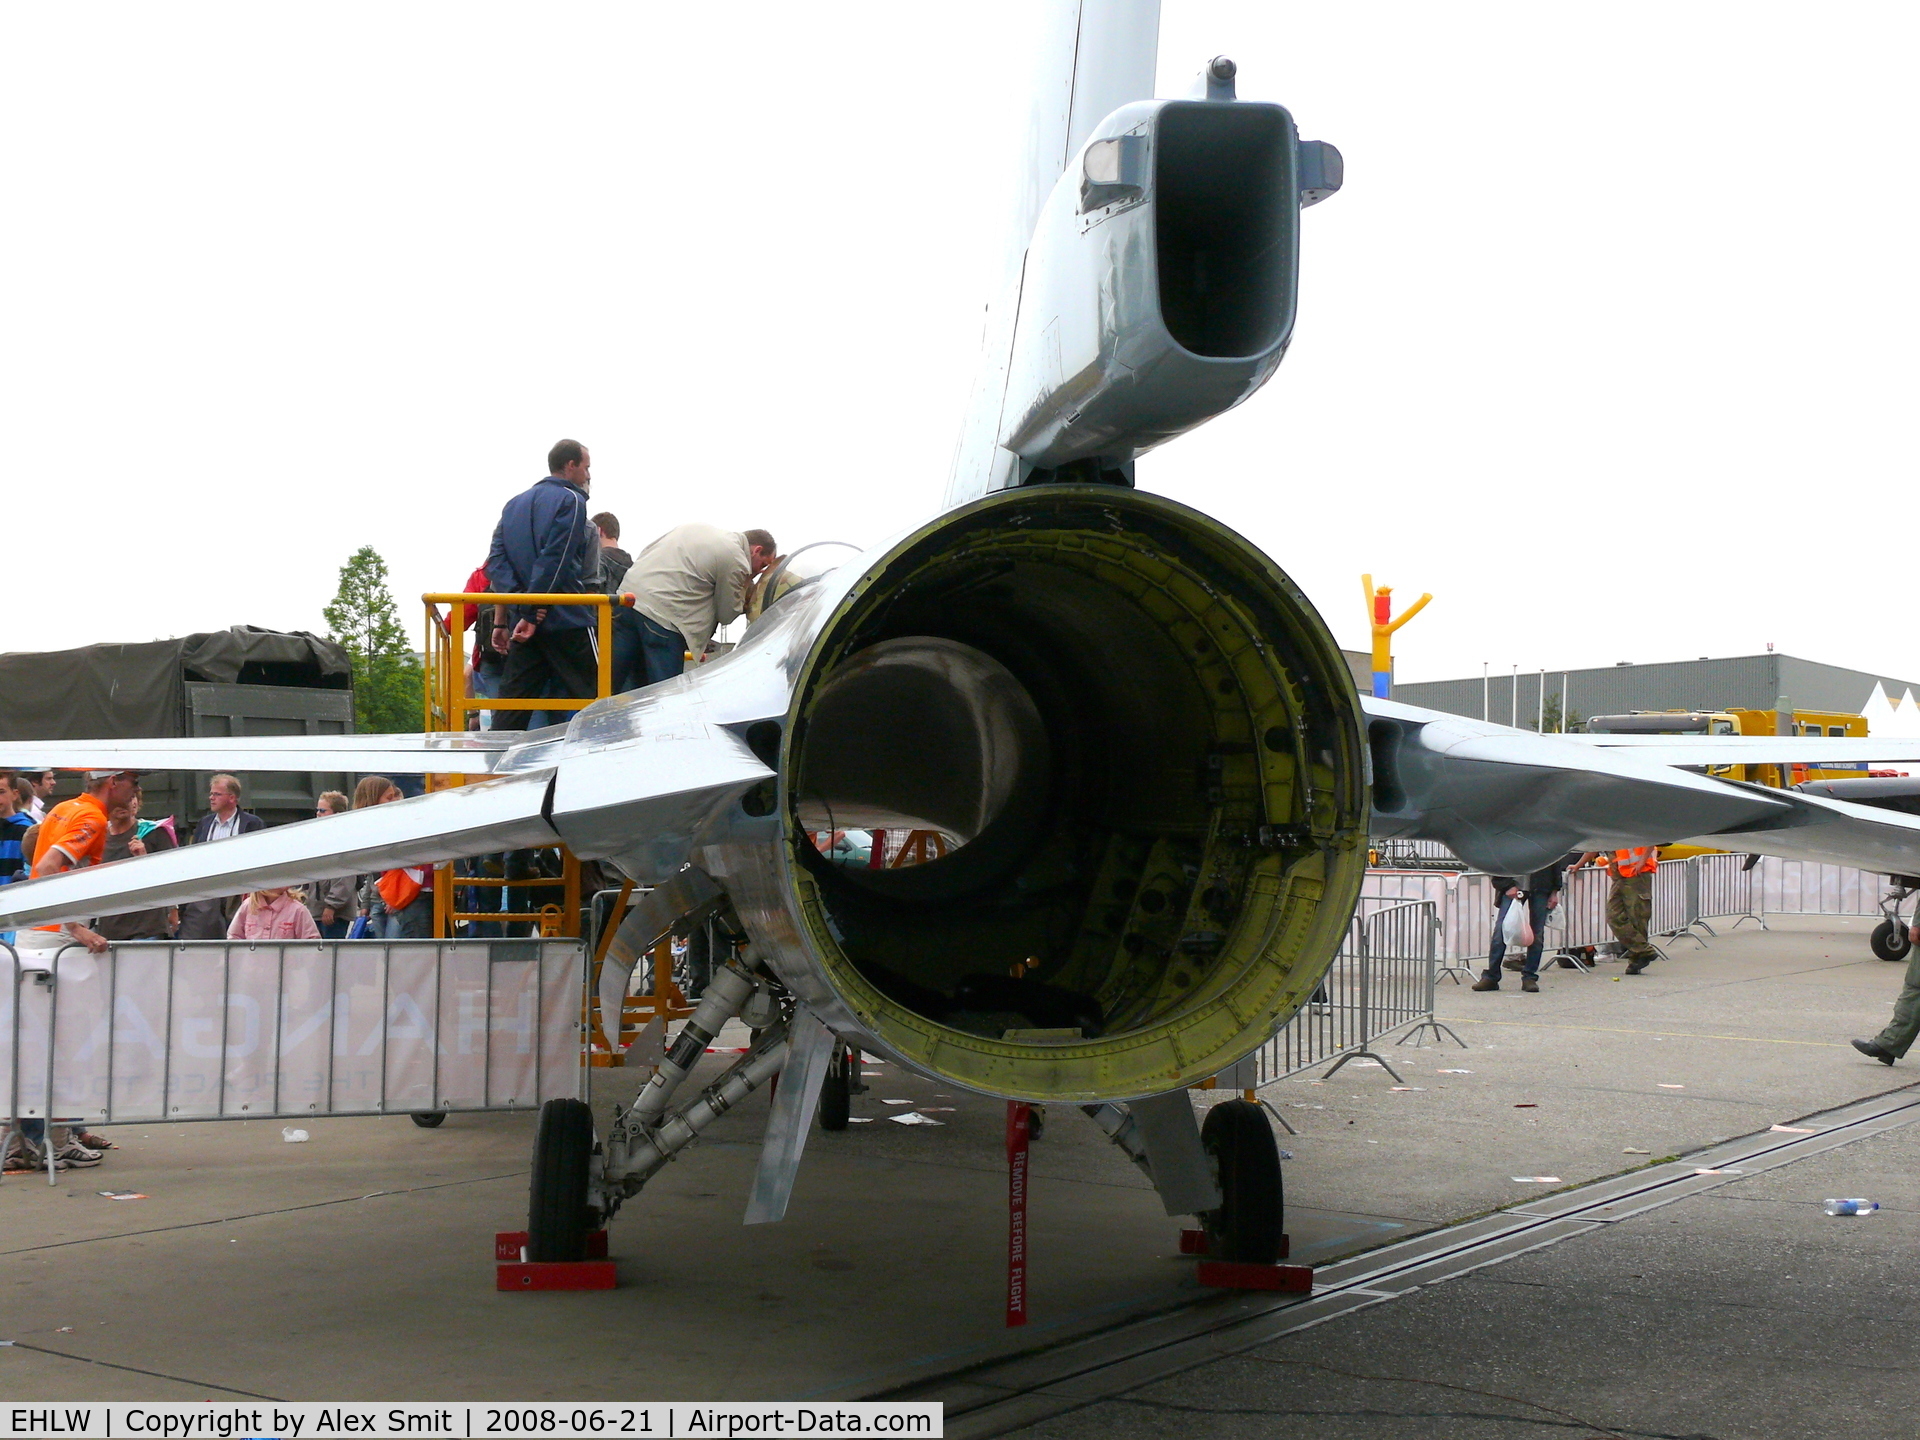 Leeuwarden Air Base Airport, Leeuwarden Netherlands (EHLW) - Standing in line for some staring into the cockpit of an F-16 that will never fly again..... 